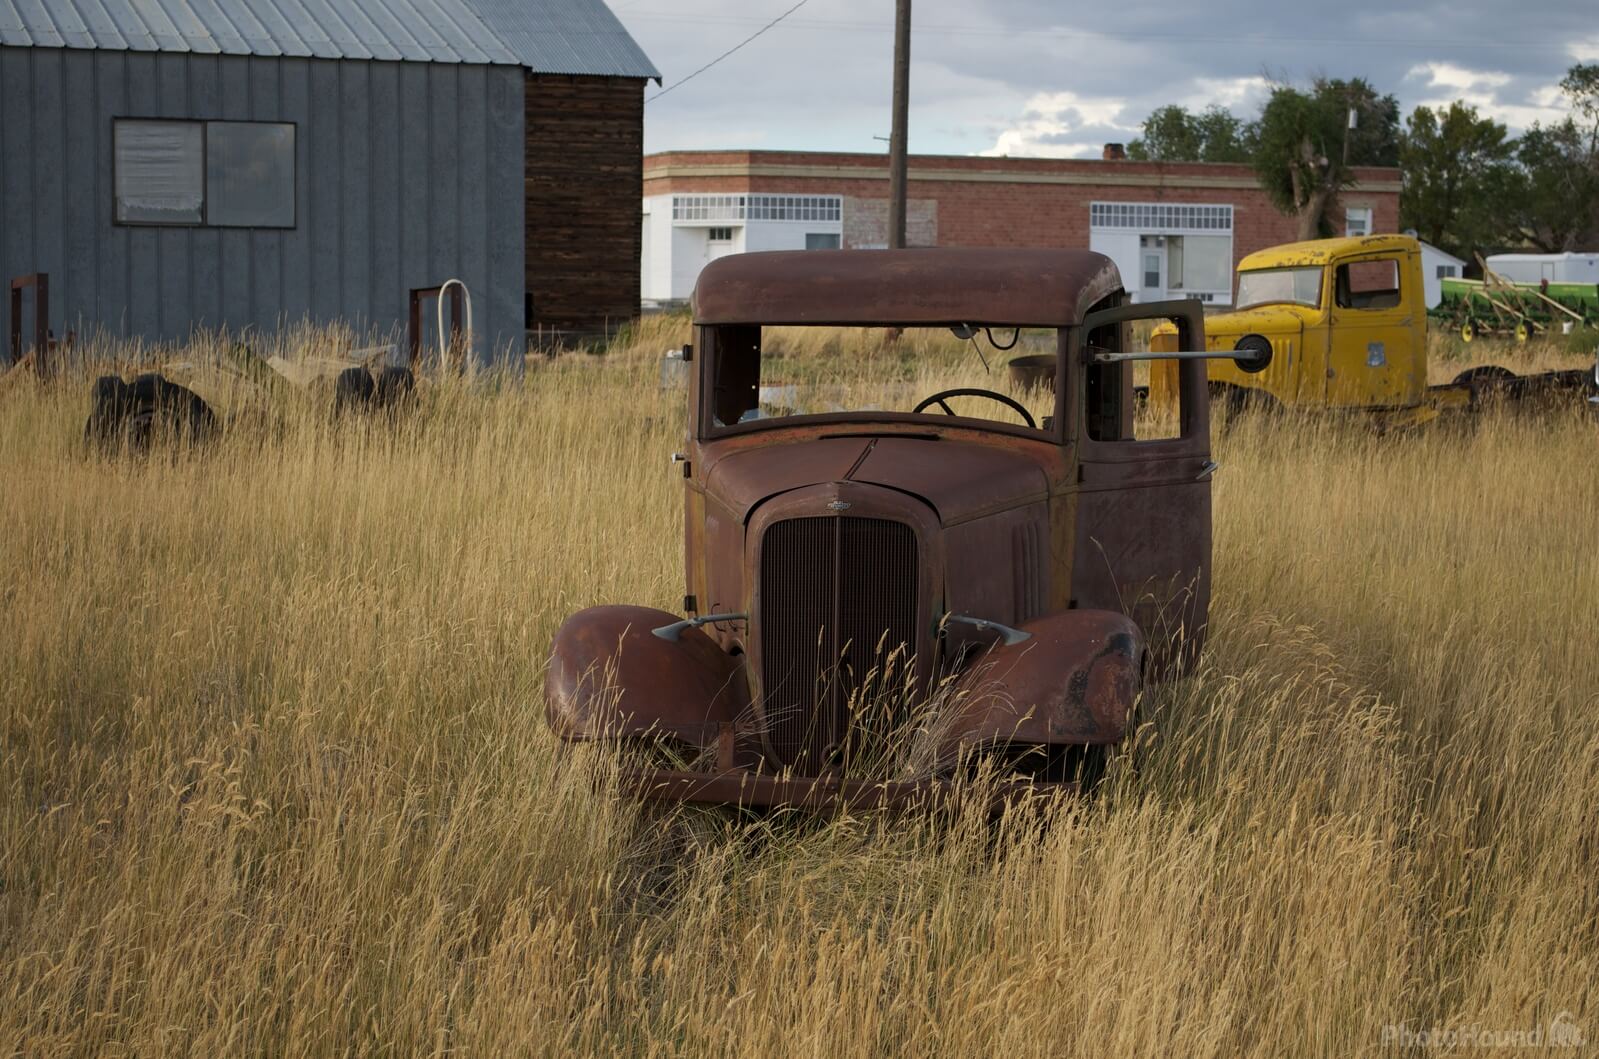 Image of Withrow, Washington by Steve West